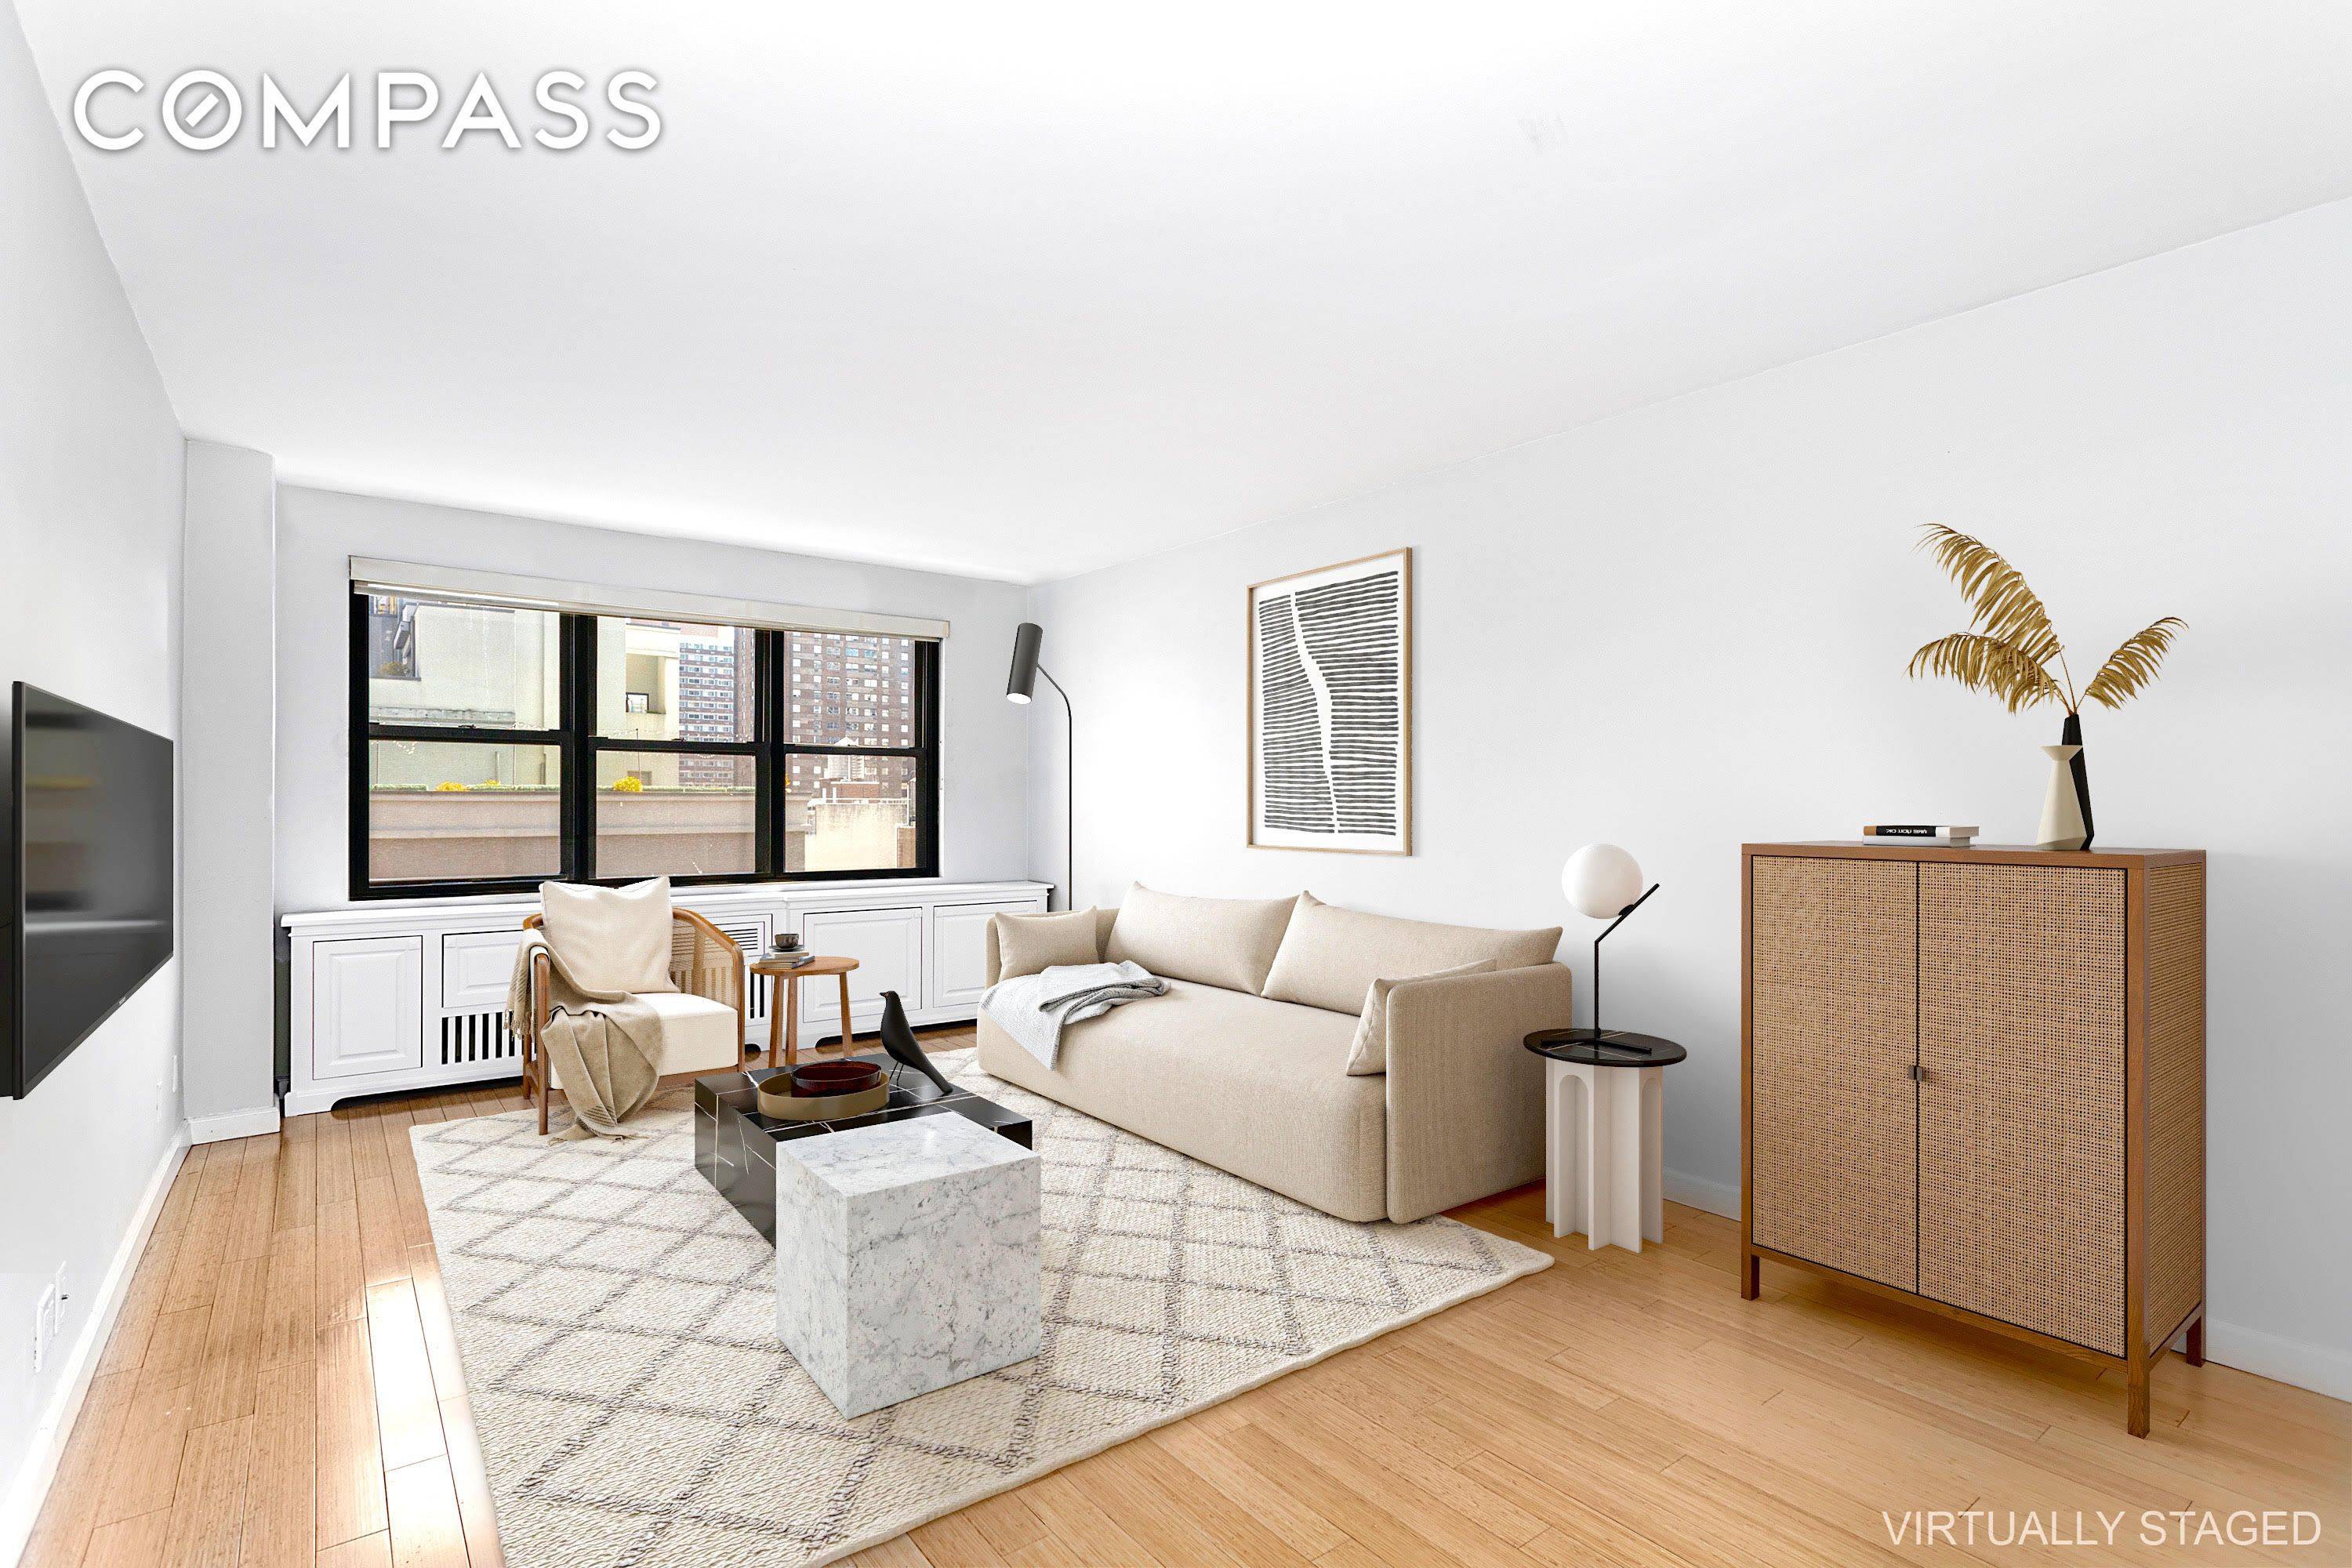 upon entry to unit 14F, you are immediately greeted by an abundance of natural sunlight pouring through the easterly facing windows with unobstructed city views.